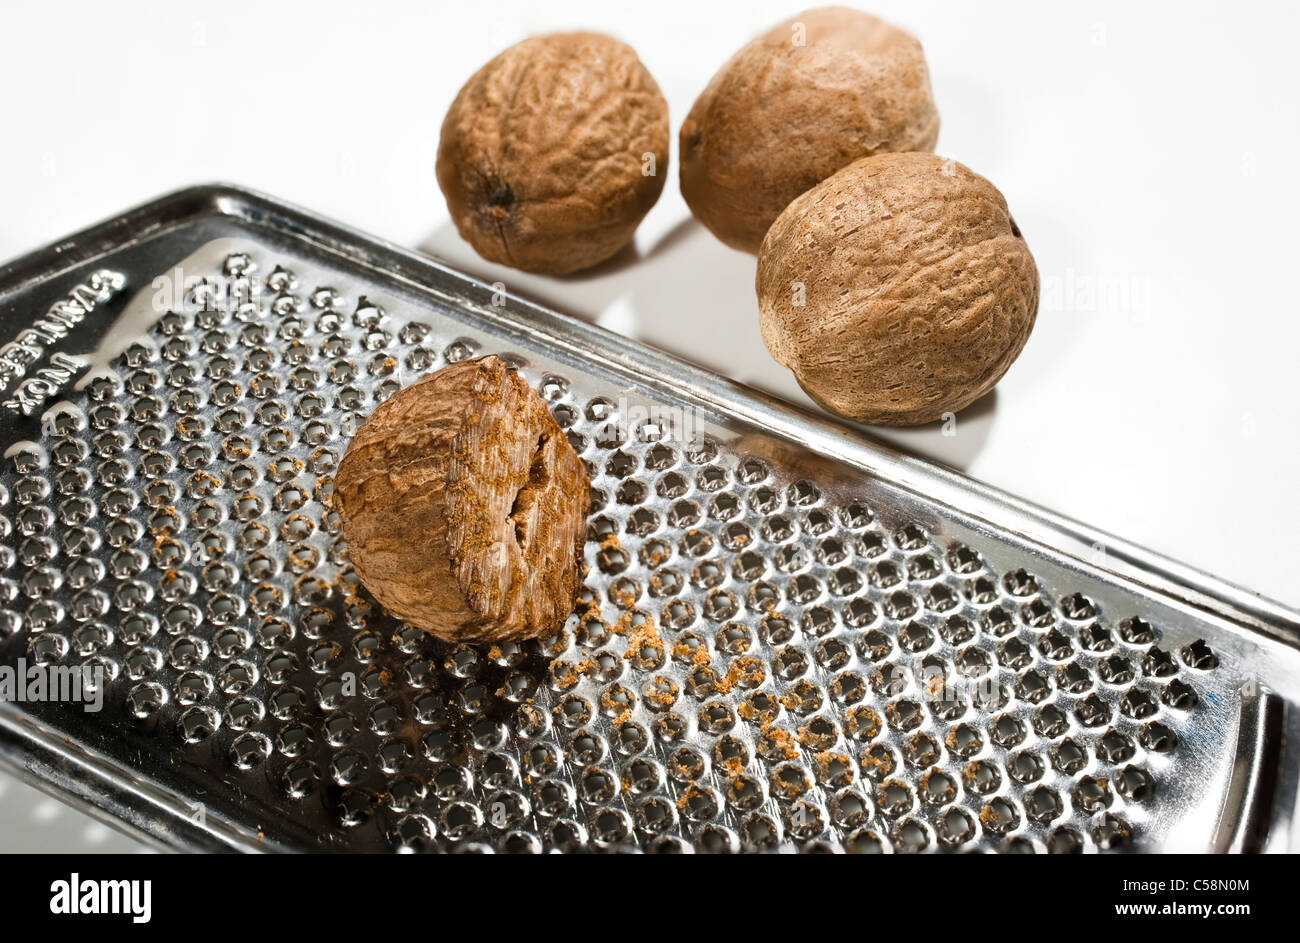 Nutmegs with a grater (Myristica Fragrans) Stock Photo